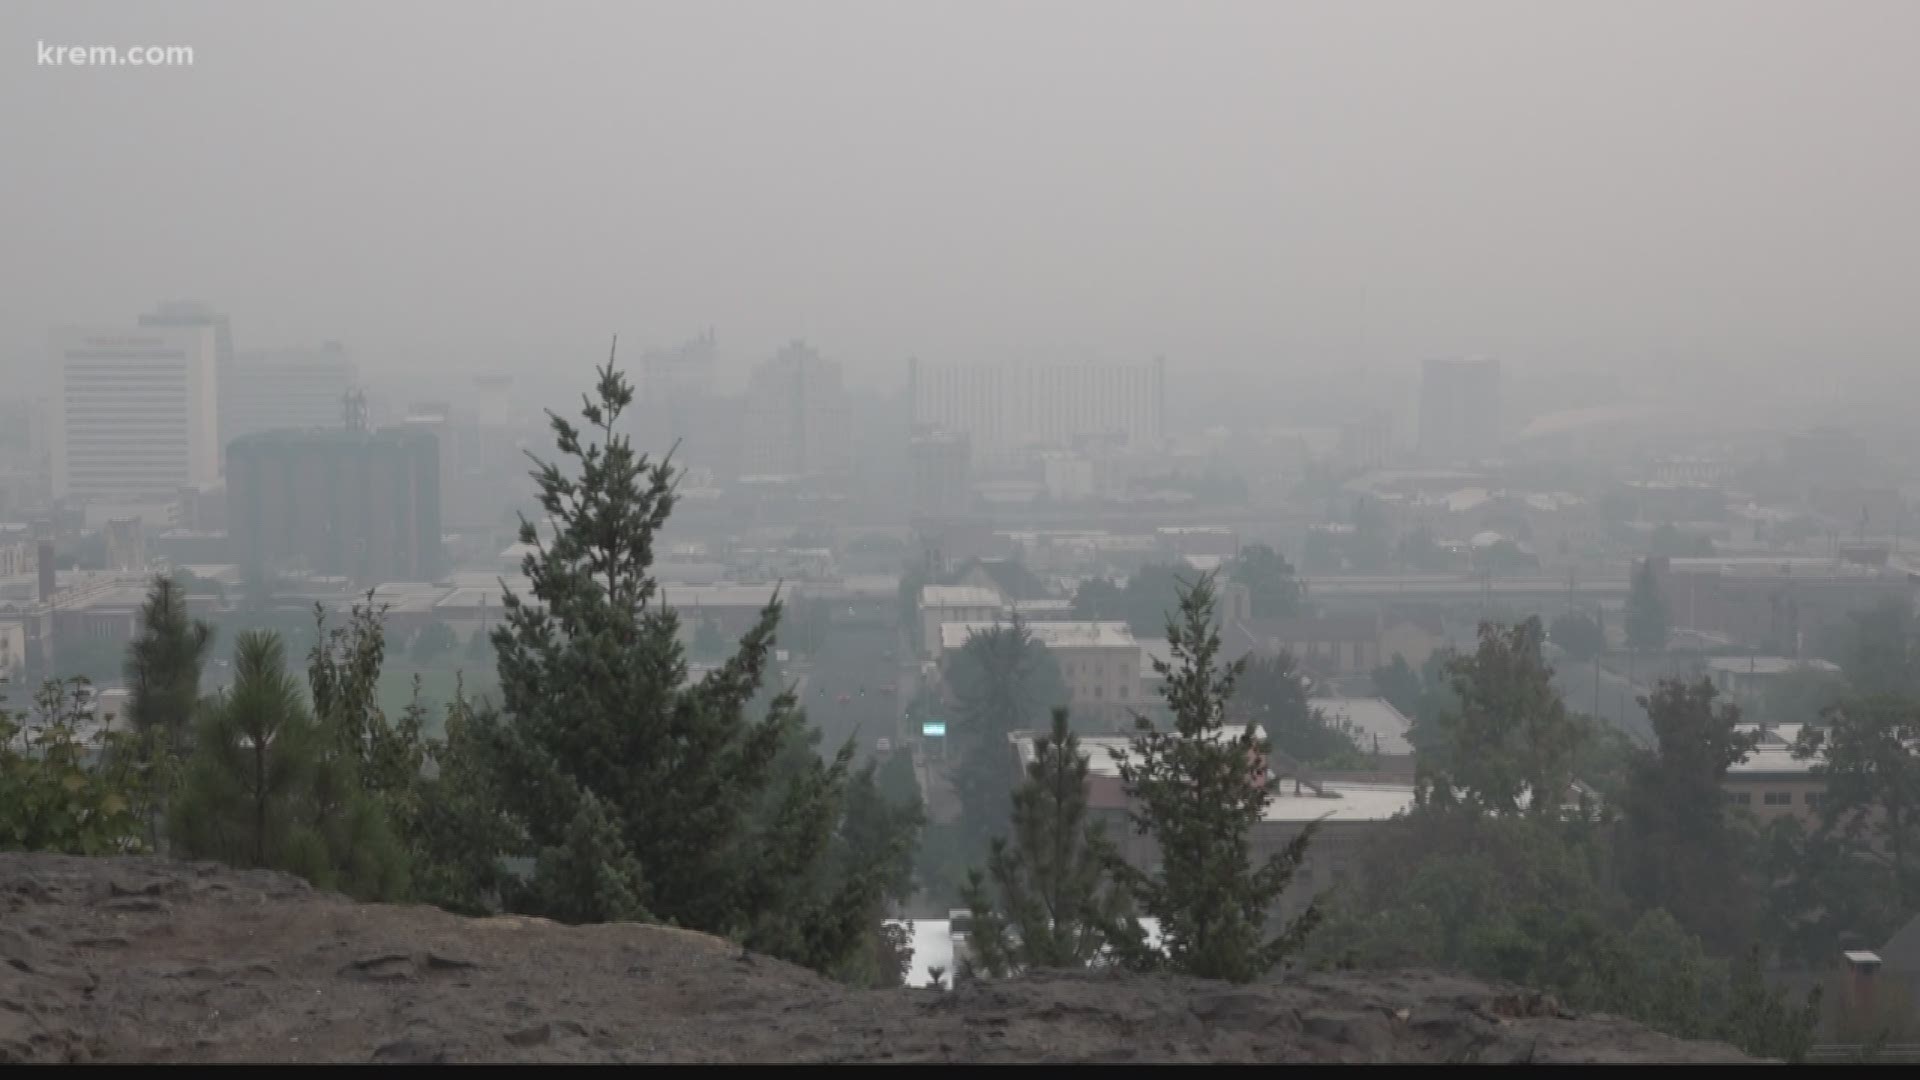 KREM Meteorologist Thomas Patrick dives into the numbers to show how this August compares to last August in terms of air quality.